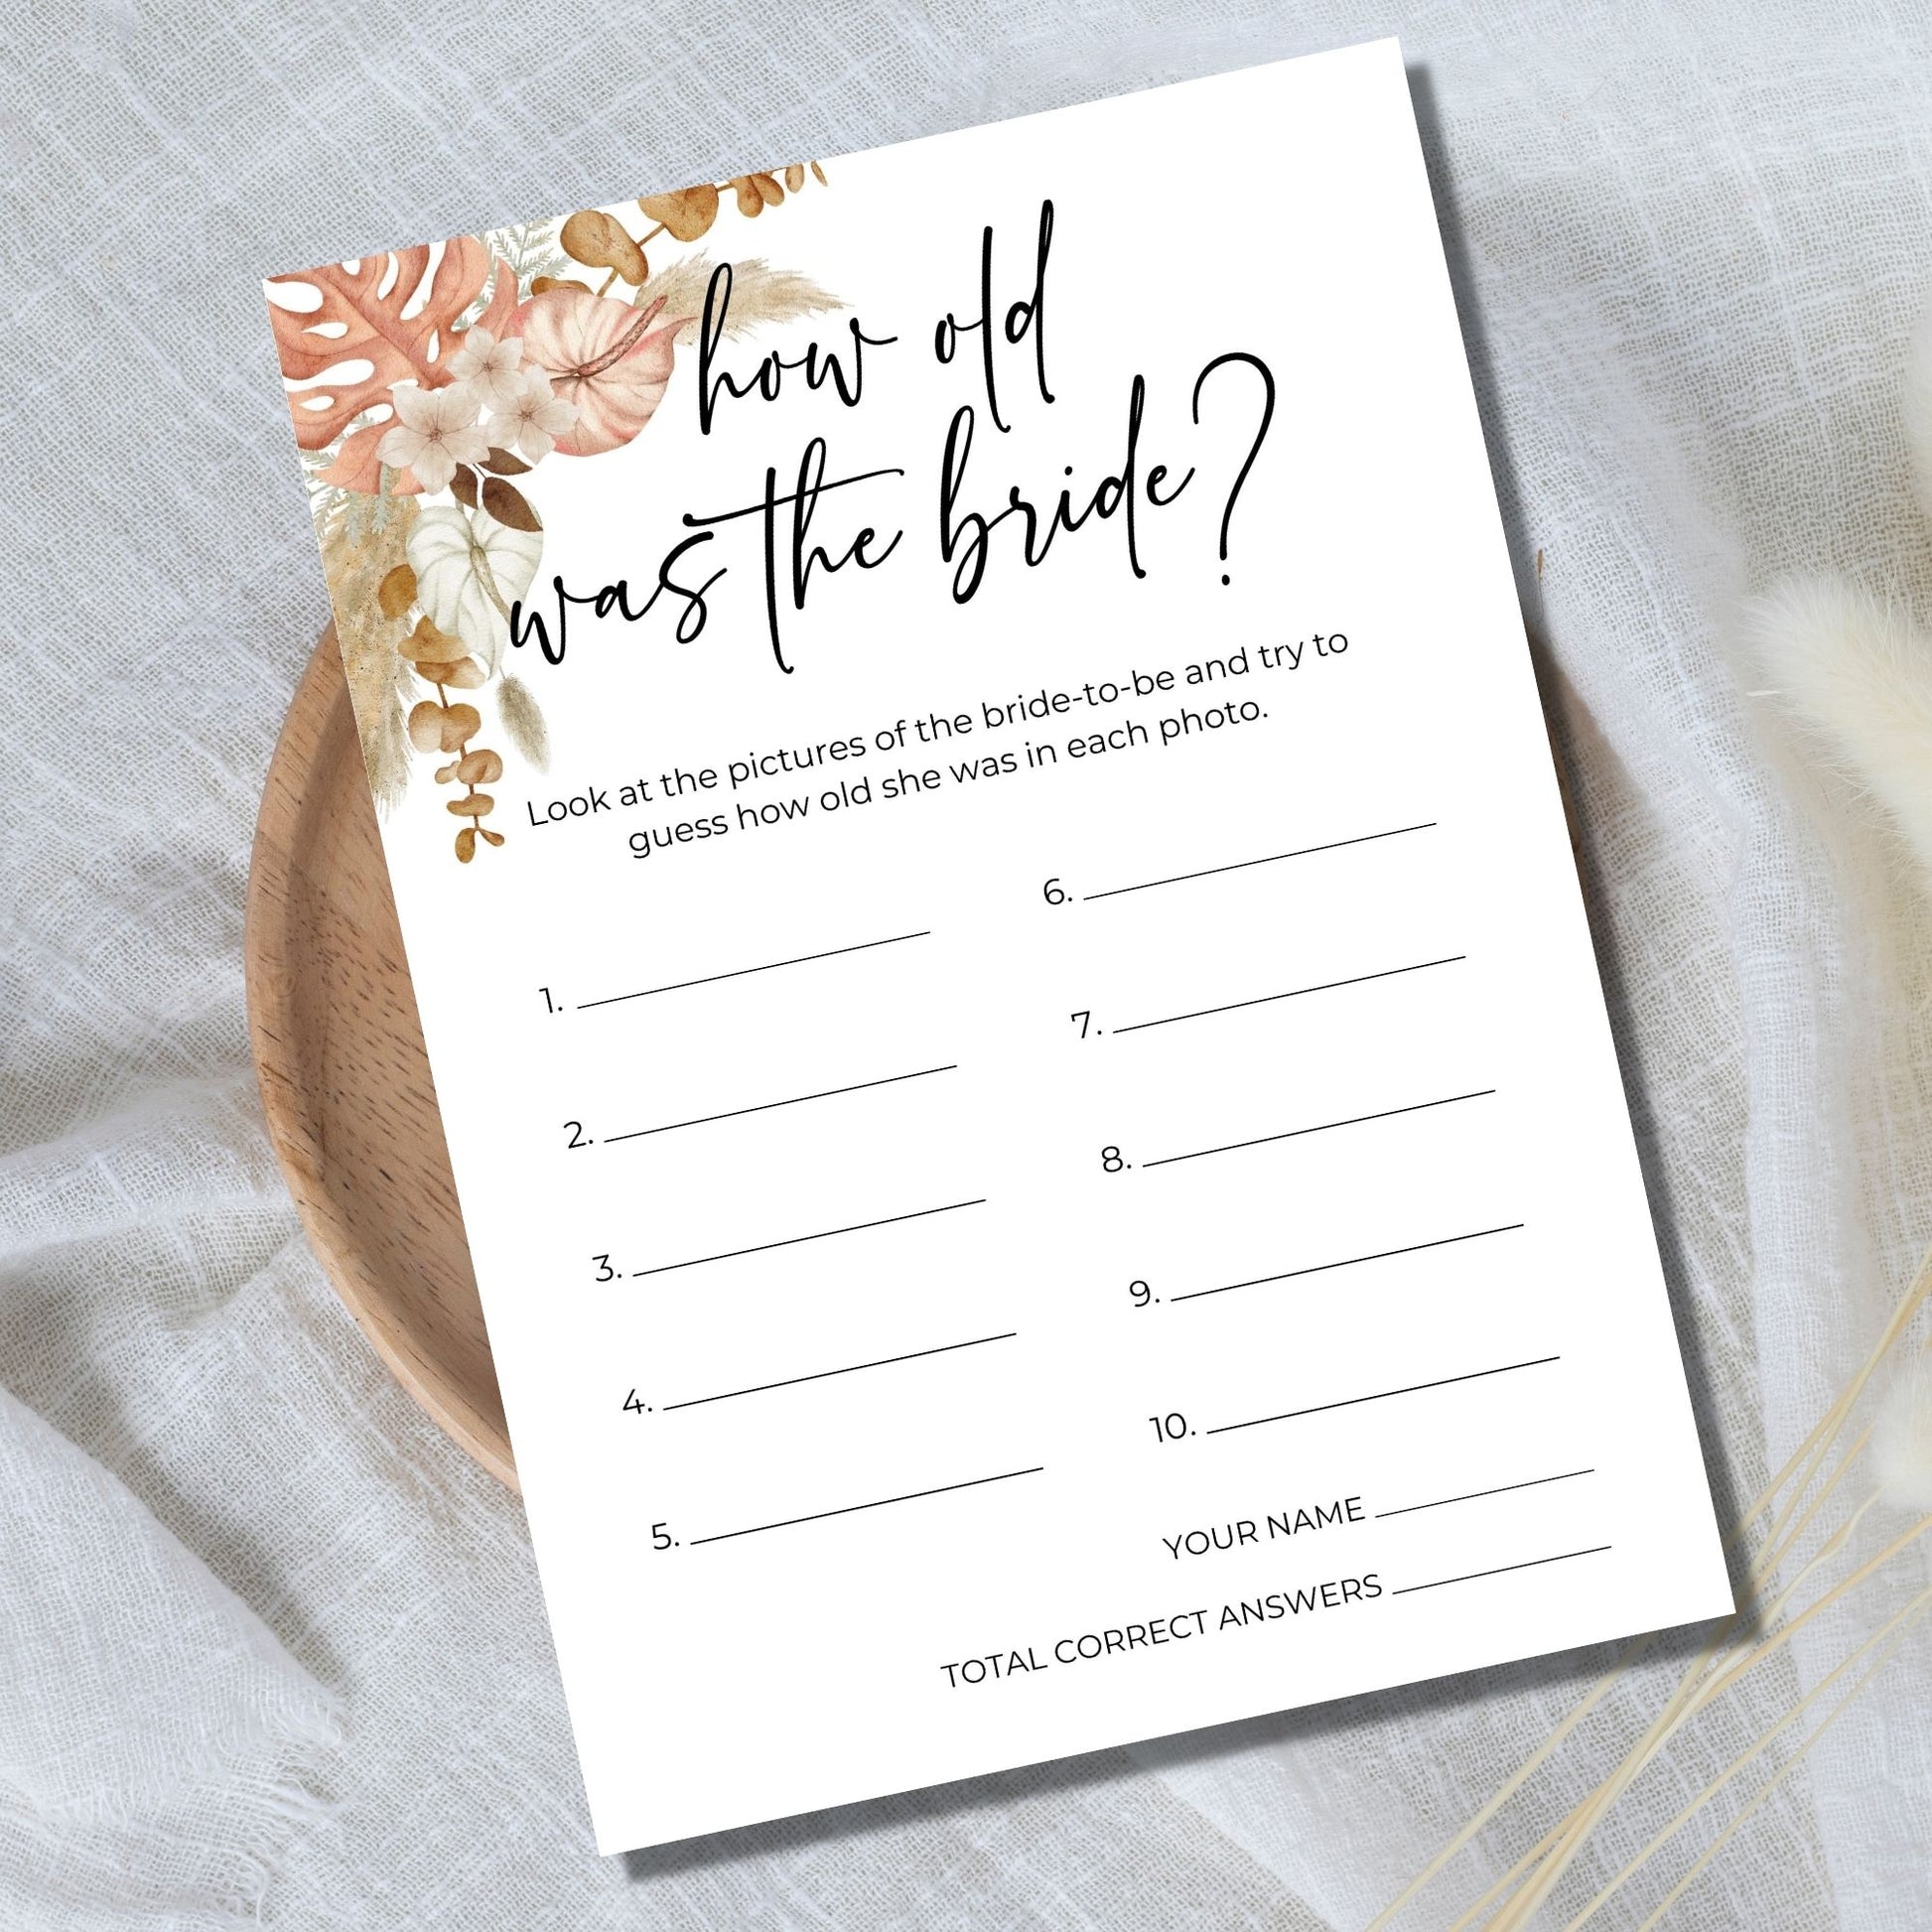 How Old Was the Bride Photo Game - Boho Floral